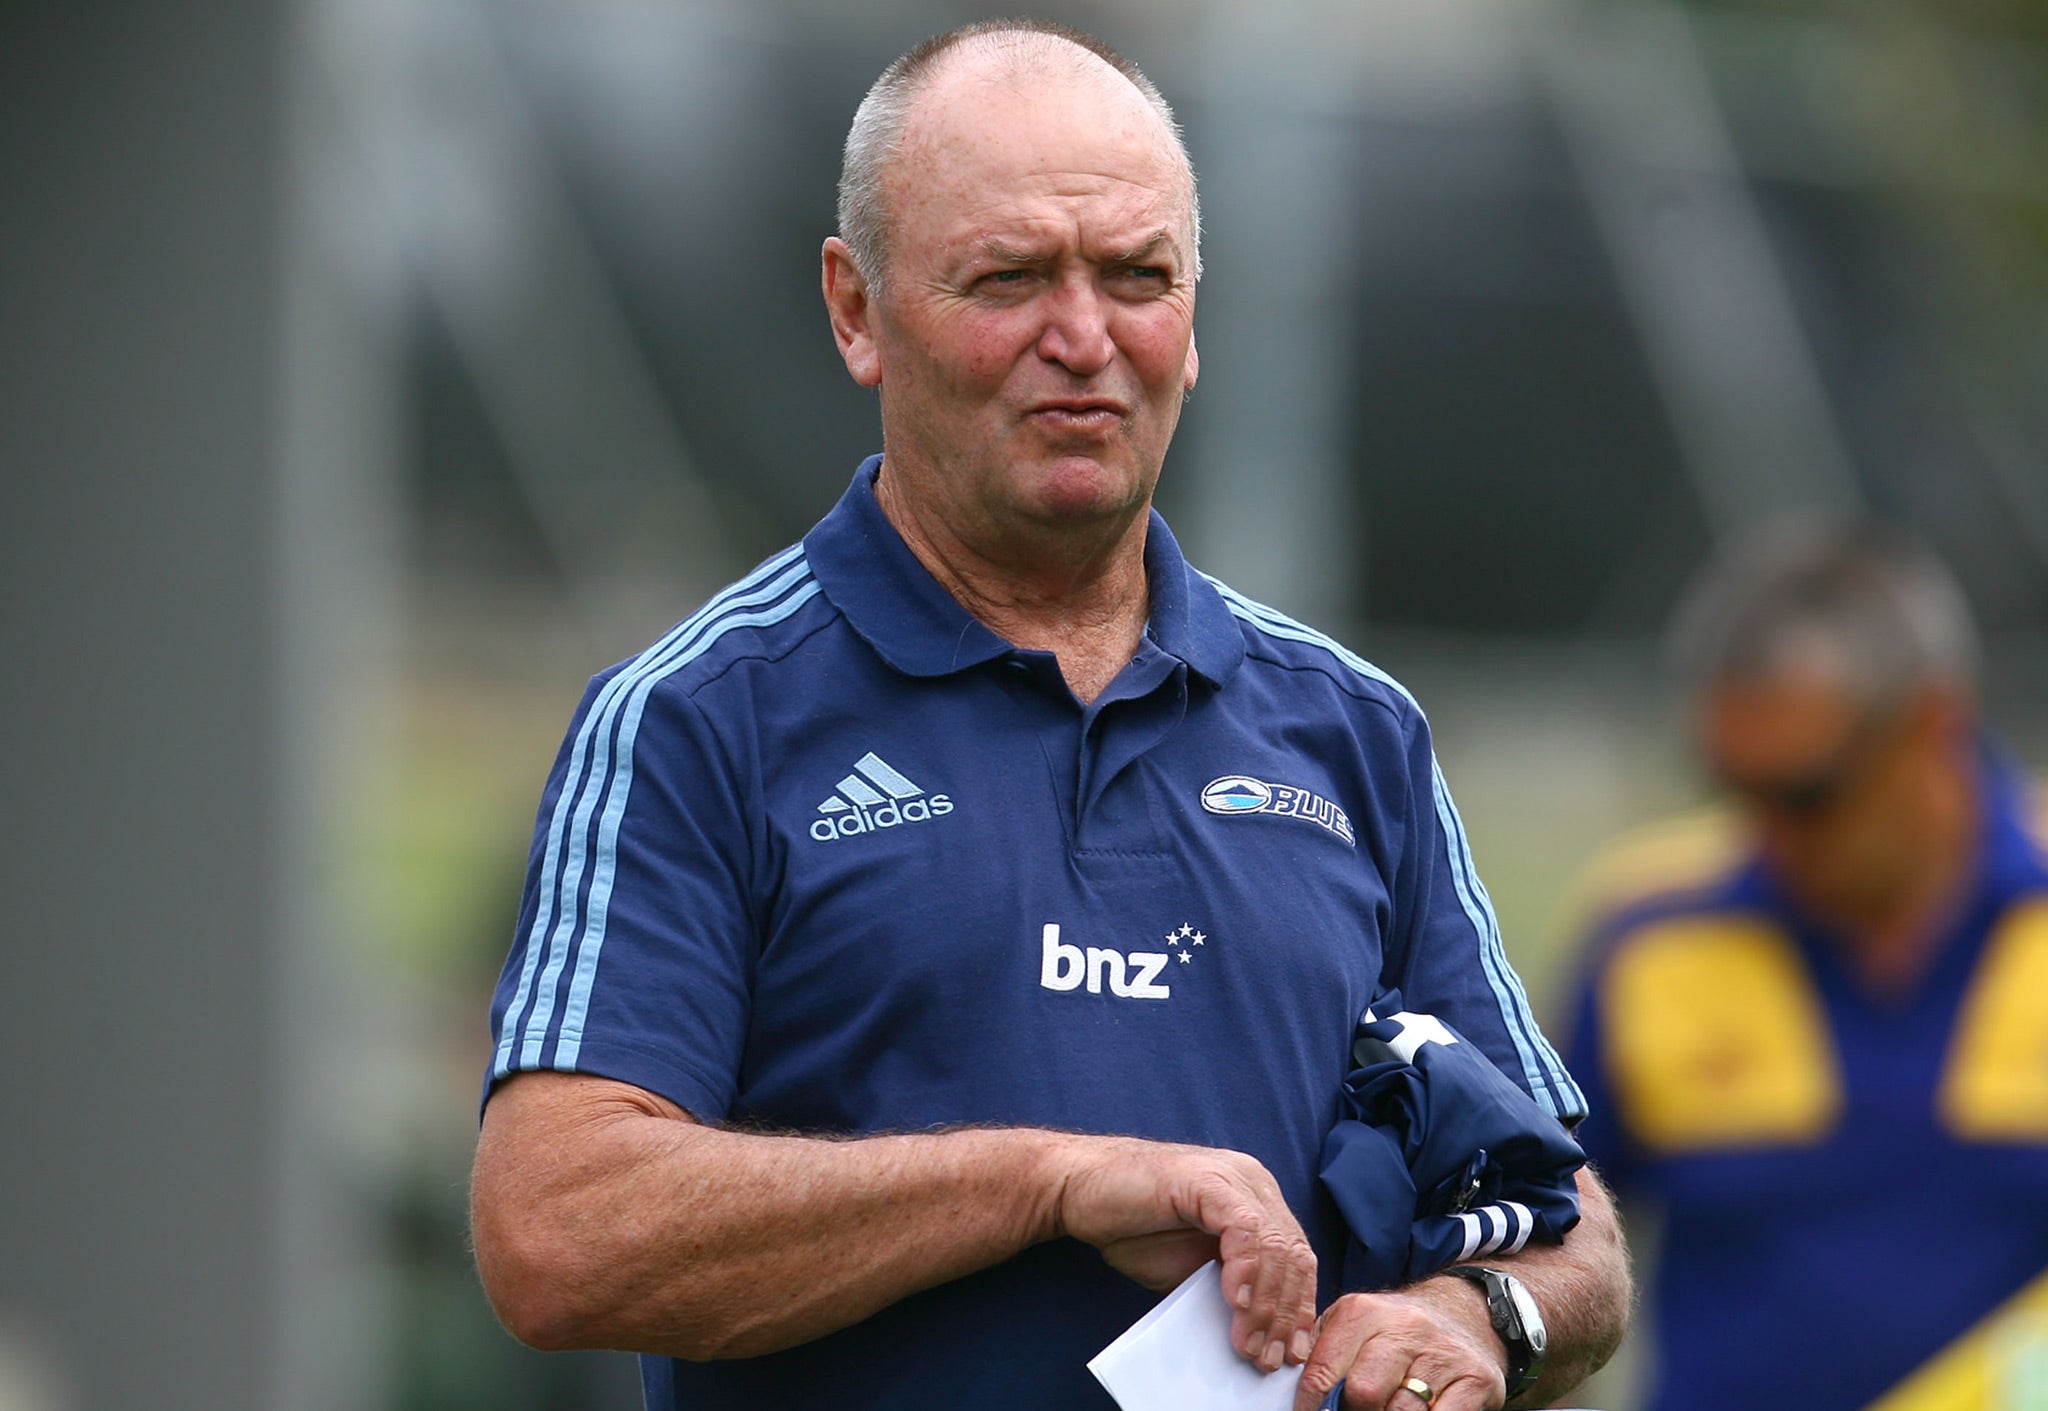 Auckland Blues defense coach Graham Henry may face disciplinary action over comments made about referee Glen Jackson